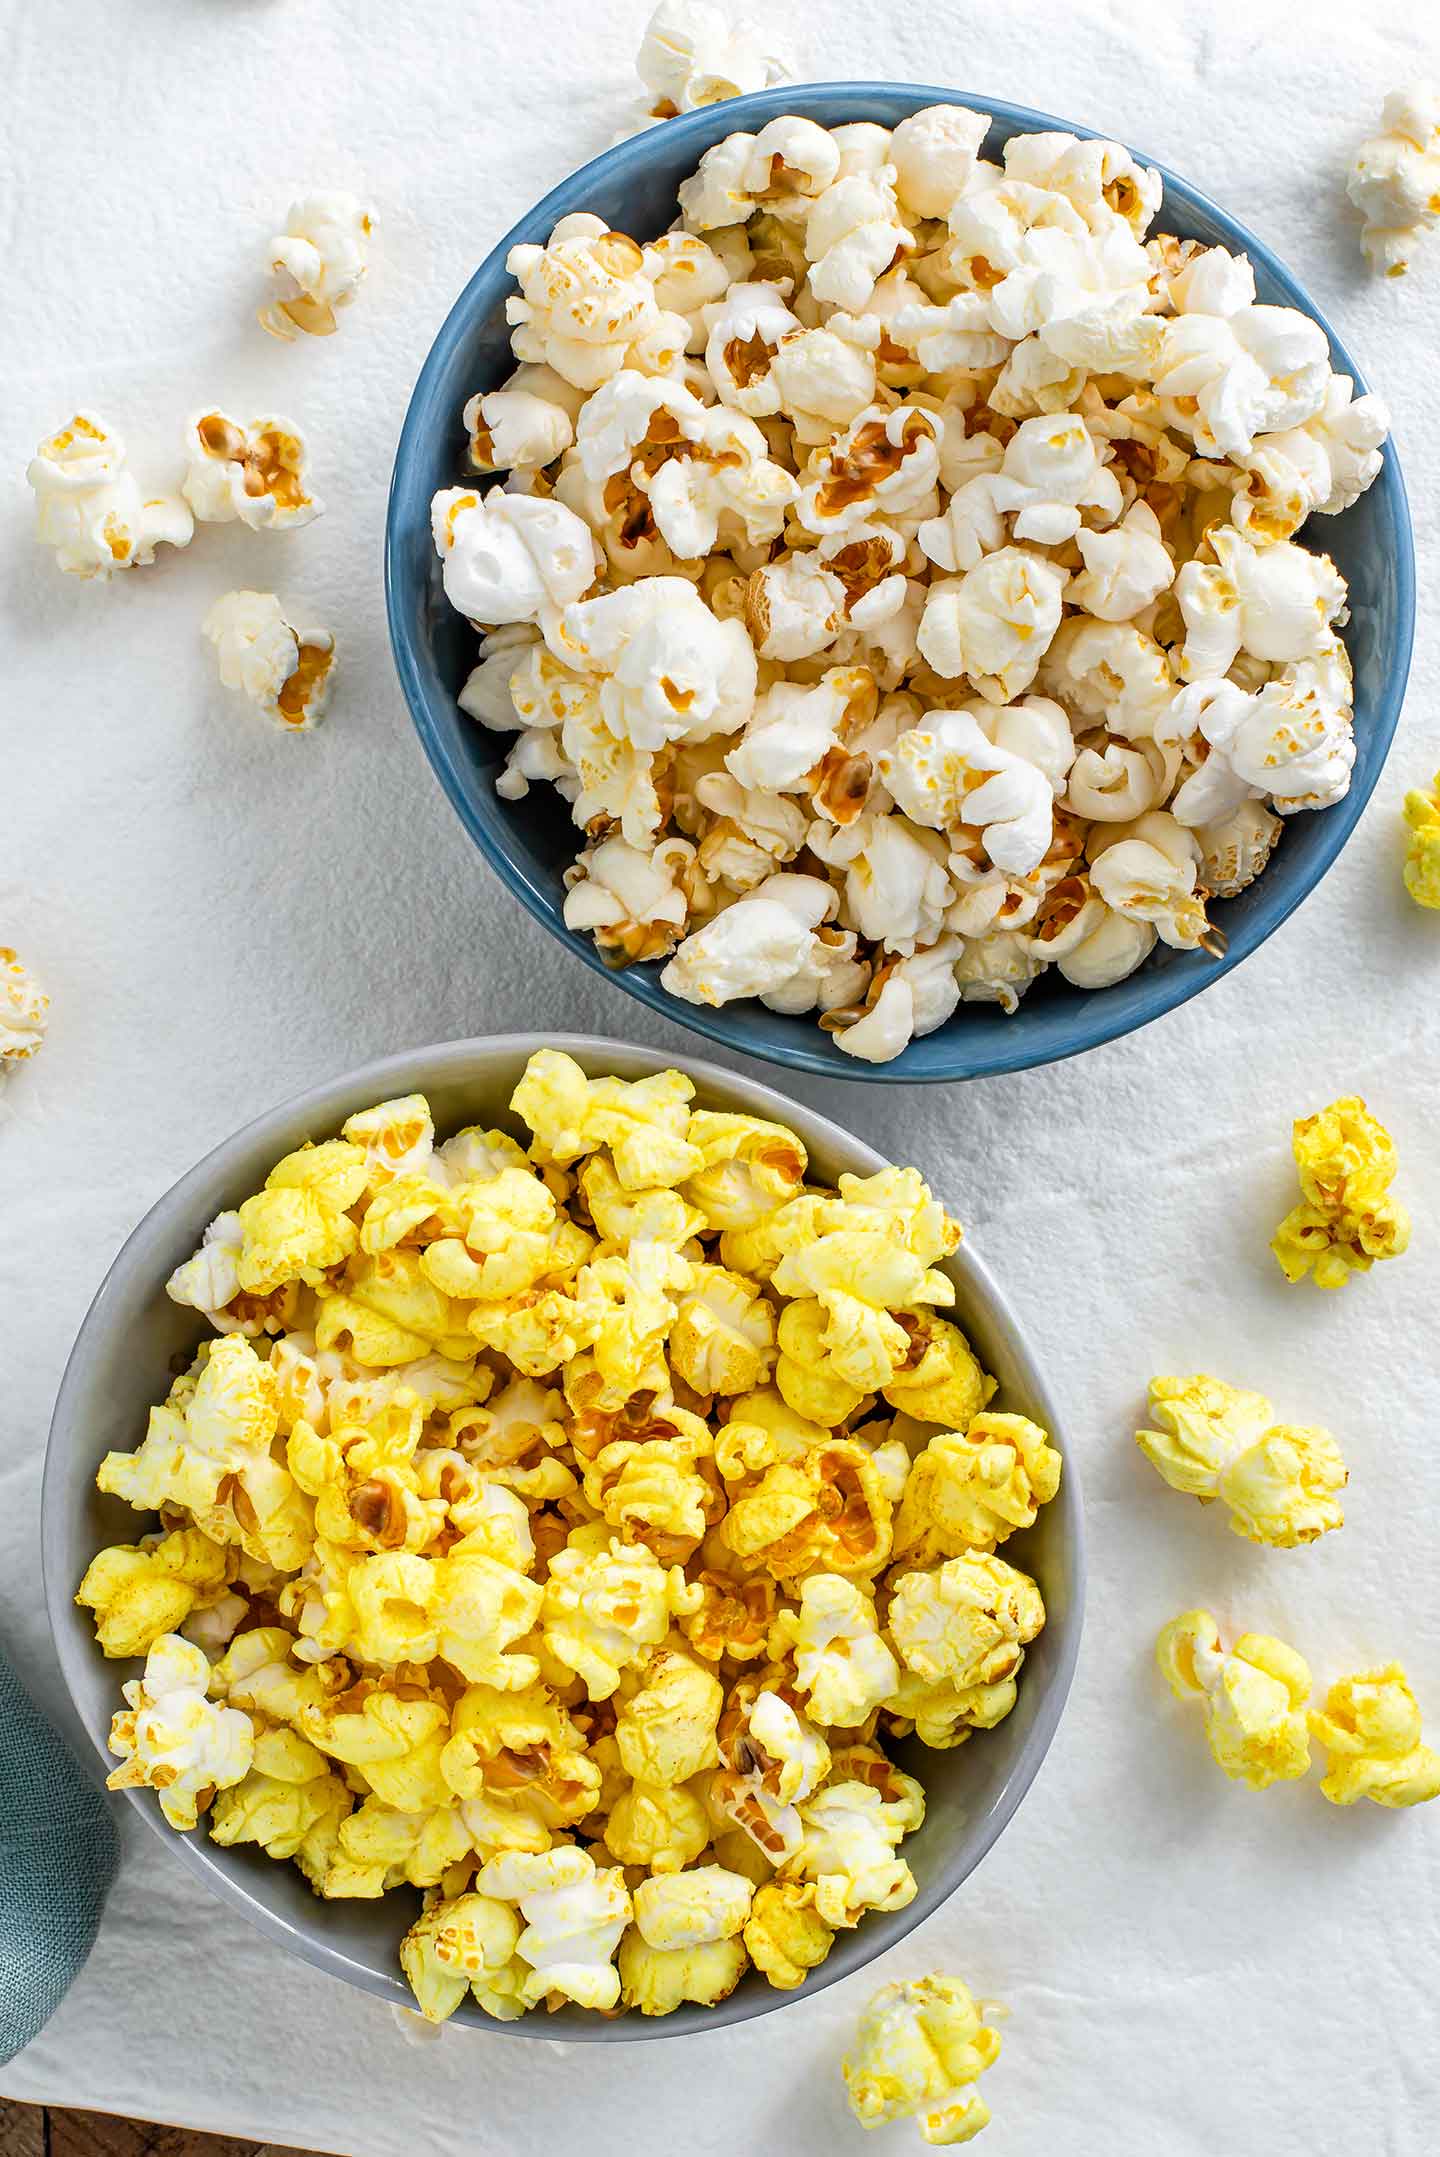 Top down view of two small bowls of popcorn. One bowl has white popcorn and the popcorn in the other bowl is a buttery yellow colour.